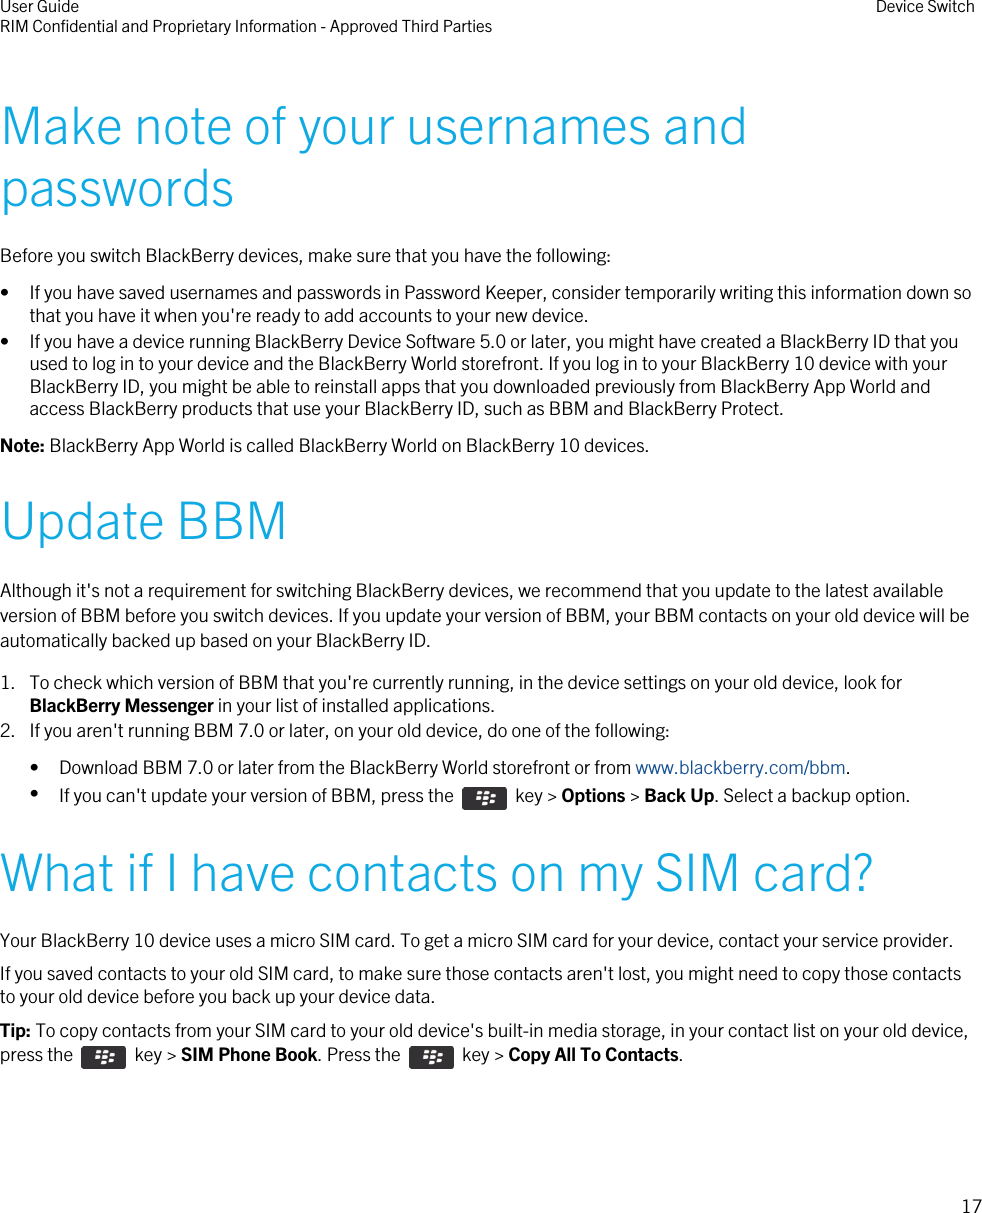 Make note of your usernames andpasswordsBefore you switch BlackBerry devices, make sure that you have the following:• If you have saved usernames and passwords in Password Keeper, consider temporarily writing this information down sothat you have it when you&apos;re ready to add accounts to your new device.• If you have a device running BlackBerry Device Software 5.0 or later, you might have created a BlackBerry ID that youused to log in to your device and the BlackBerry World storefront. If you log in to your BlackBerry 10 device with yourBlackBerry ID, you might be able to reinstall apps that you downloaded previously from BlackBerry App World andaccess BlackBerry products that use your BlackBerry ID, such as BBM and BlackBerry Protect.Note: BlackBerry App World is called BlackBerry World on BlackBerry 10 devices.Update BBMAlthough it&apos;s not a requirement for switching BlackBerry devices, we recommend that you update to the latest availableversion of BBM before you switch devices. If you update your version of BBM, your BBM contacts on your old device will beautomatically backed up based on your BlackBerry ID.1. To check which version of BBM that you&apos;re currently running, in the device settings on your old device, look forBlackBerry Messenger in your list of installed applications.2. If you aren&apos;t running BBM 7.0 or later, on your old device, do one of the following:• Download BBM 7.0 or later from the BlackBerry World storefront or from www.blackberry.com/bbm.•If you can&apos;t update your version of BBM, press the    key &gt; Options &gt; Back Up. Select a backup option.What if I have contacts on my SIM card?Your BlackBerry 10 device uses a micro SIM card. To get a micro SIM card for your device, contact your service provider.If you saved contacts to your old SIM card, to make sure those contacts aren&apos;t lost, you might need to copy those contactsto your old device before you back up your device data.Tip: To copy contacts from your SIM card to your old device&apos;s built-in media storage, in your contact list on your old device,press the    key &gt; SIM Phone Book. Press the    key &gt; Copy All To Contacts.User GuideRIM Confidential and Proprietary Information - Approved Third Parties Device Switch17